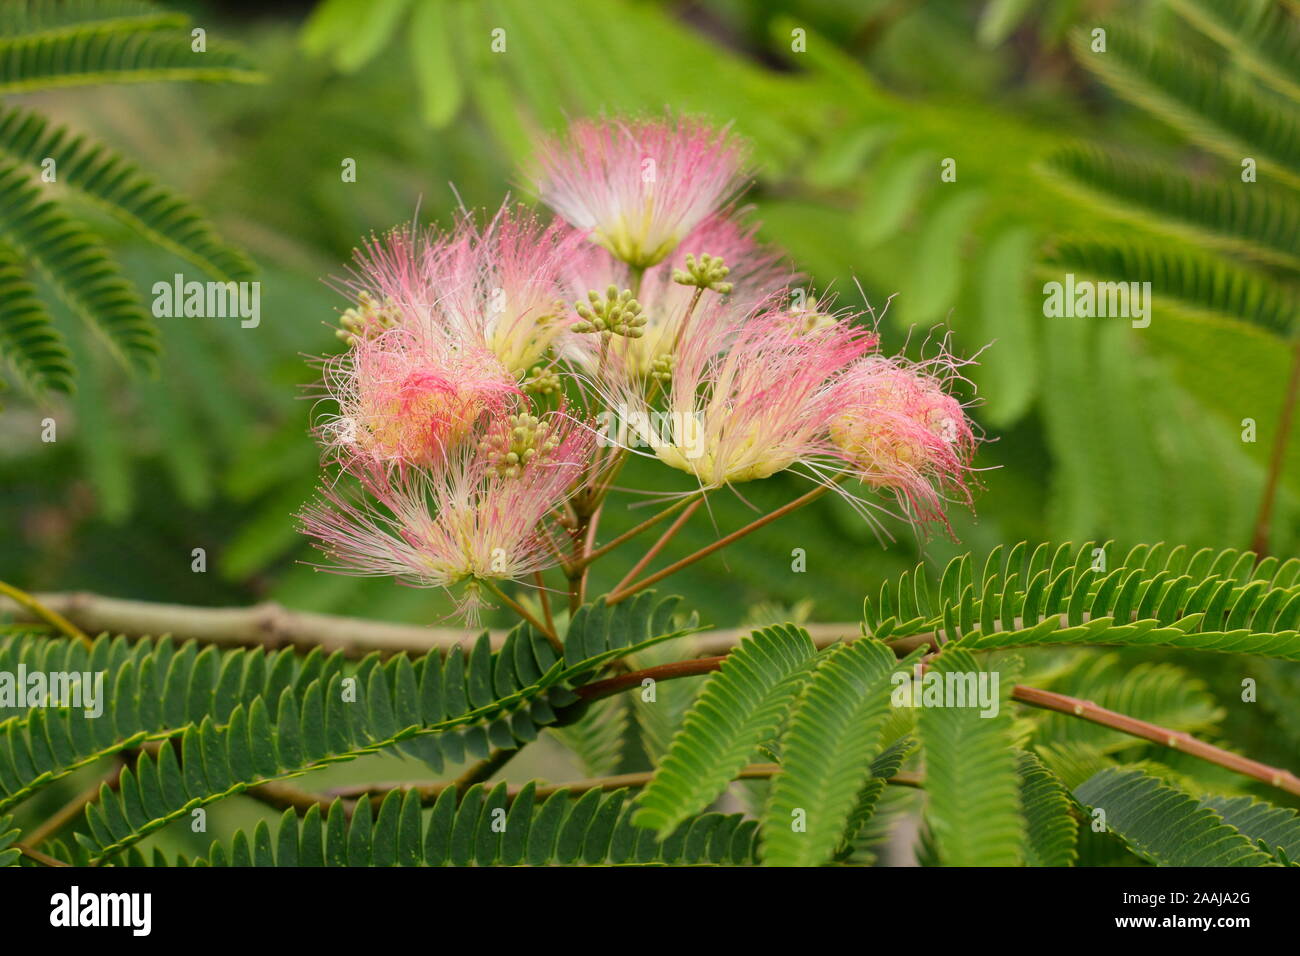 Albizia julibrissin 'Tropical Dream'. Persian silk tree displaying distinctive feathery pink blooms in late summer - September. UK Stock Photo